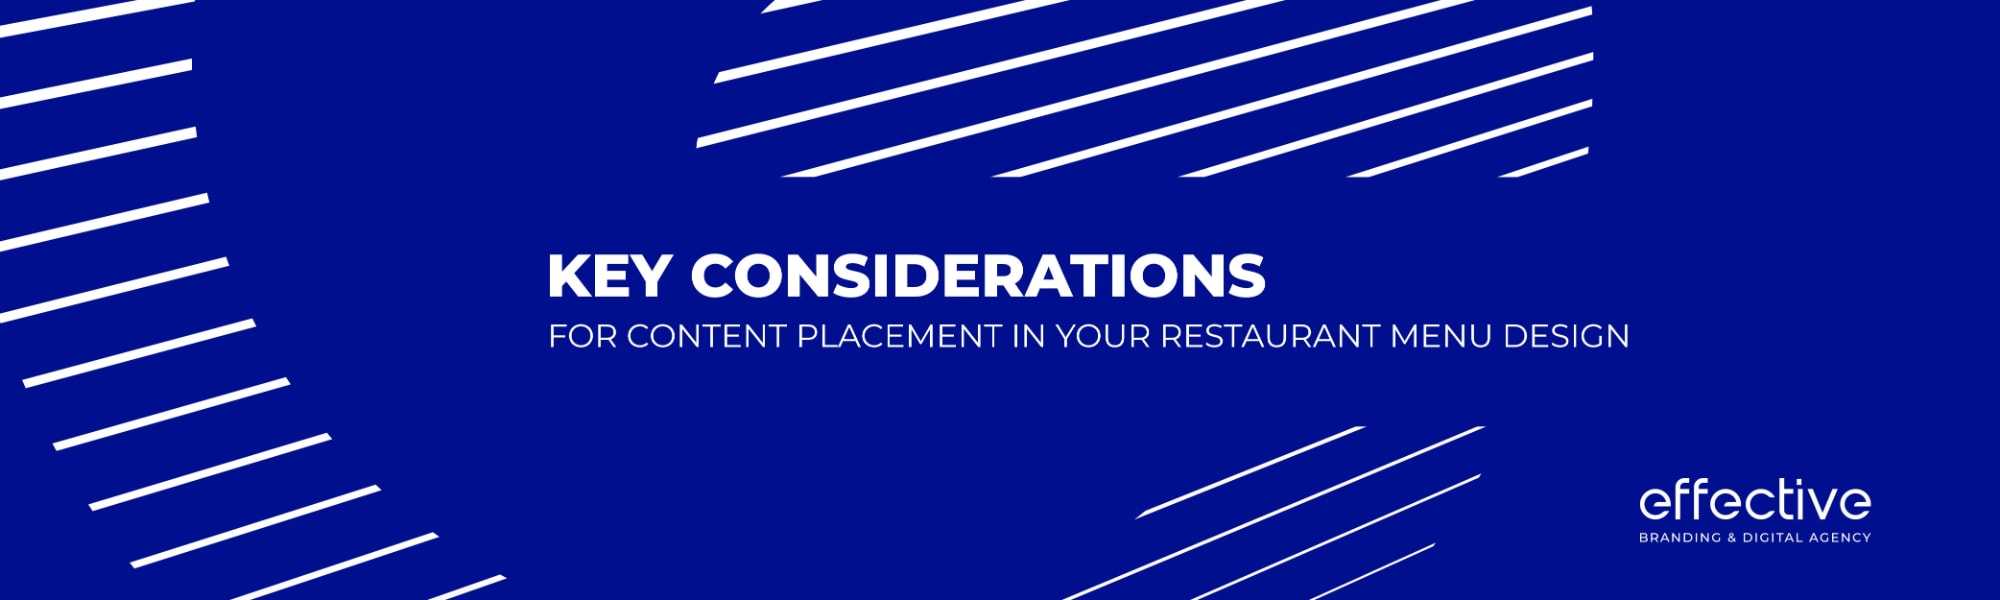 Key Considerations for Content Placement in Your Restaurant Menu Design